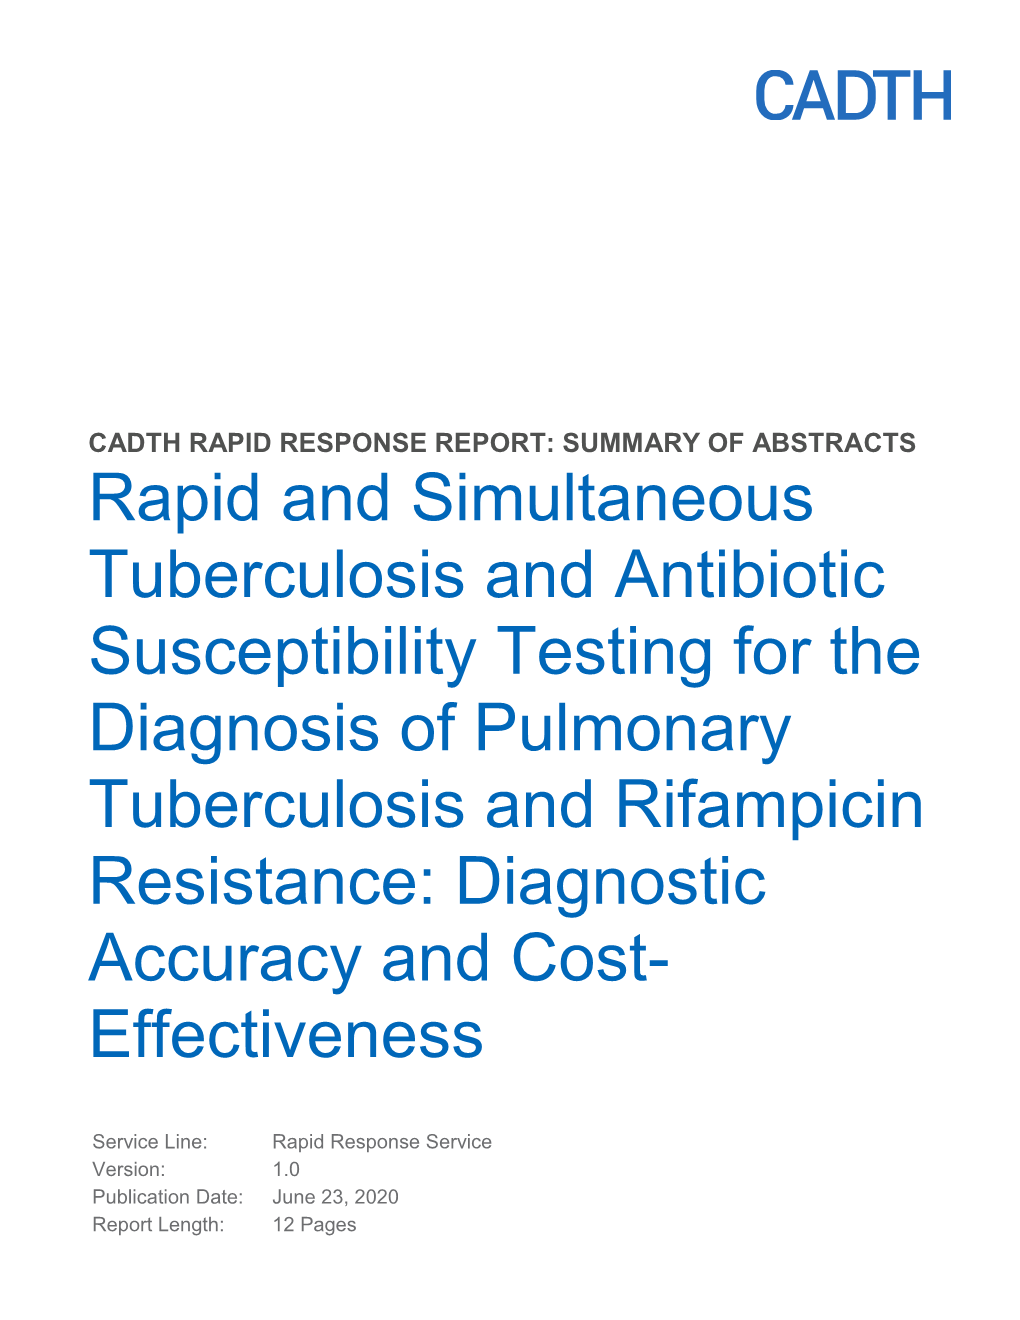 Rapid and Simultaneous Tuberculosis and Antibiotic Susceptibility Testing for the Diagnosis of Pulmonary Tuberculosis and Rifamp